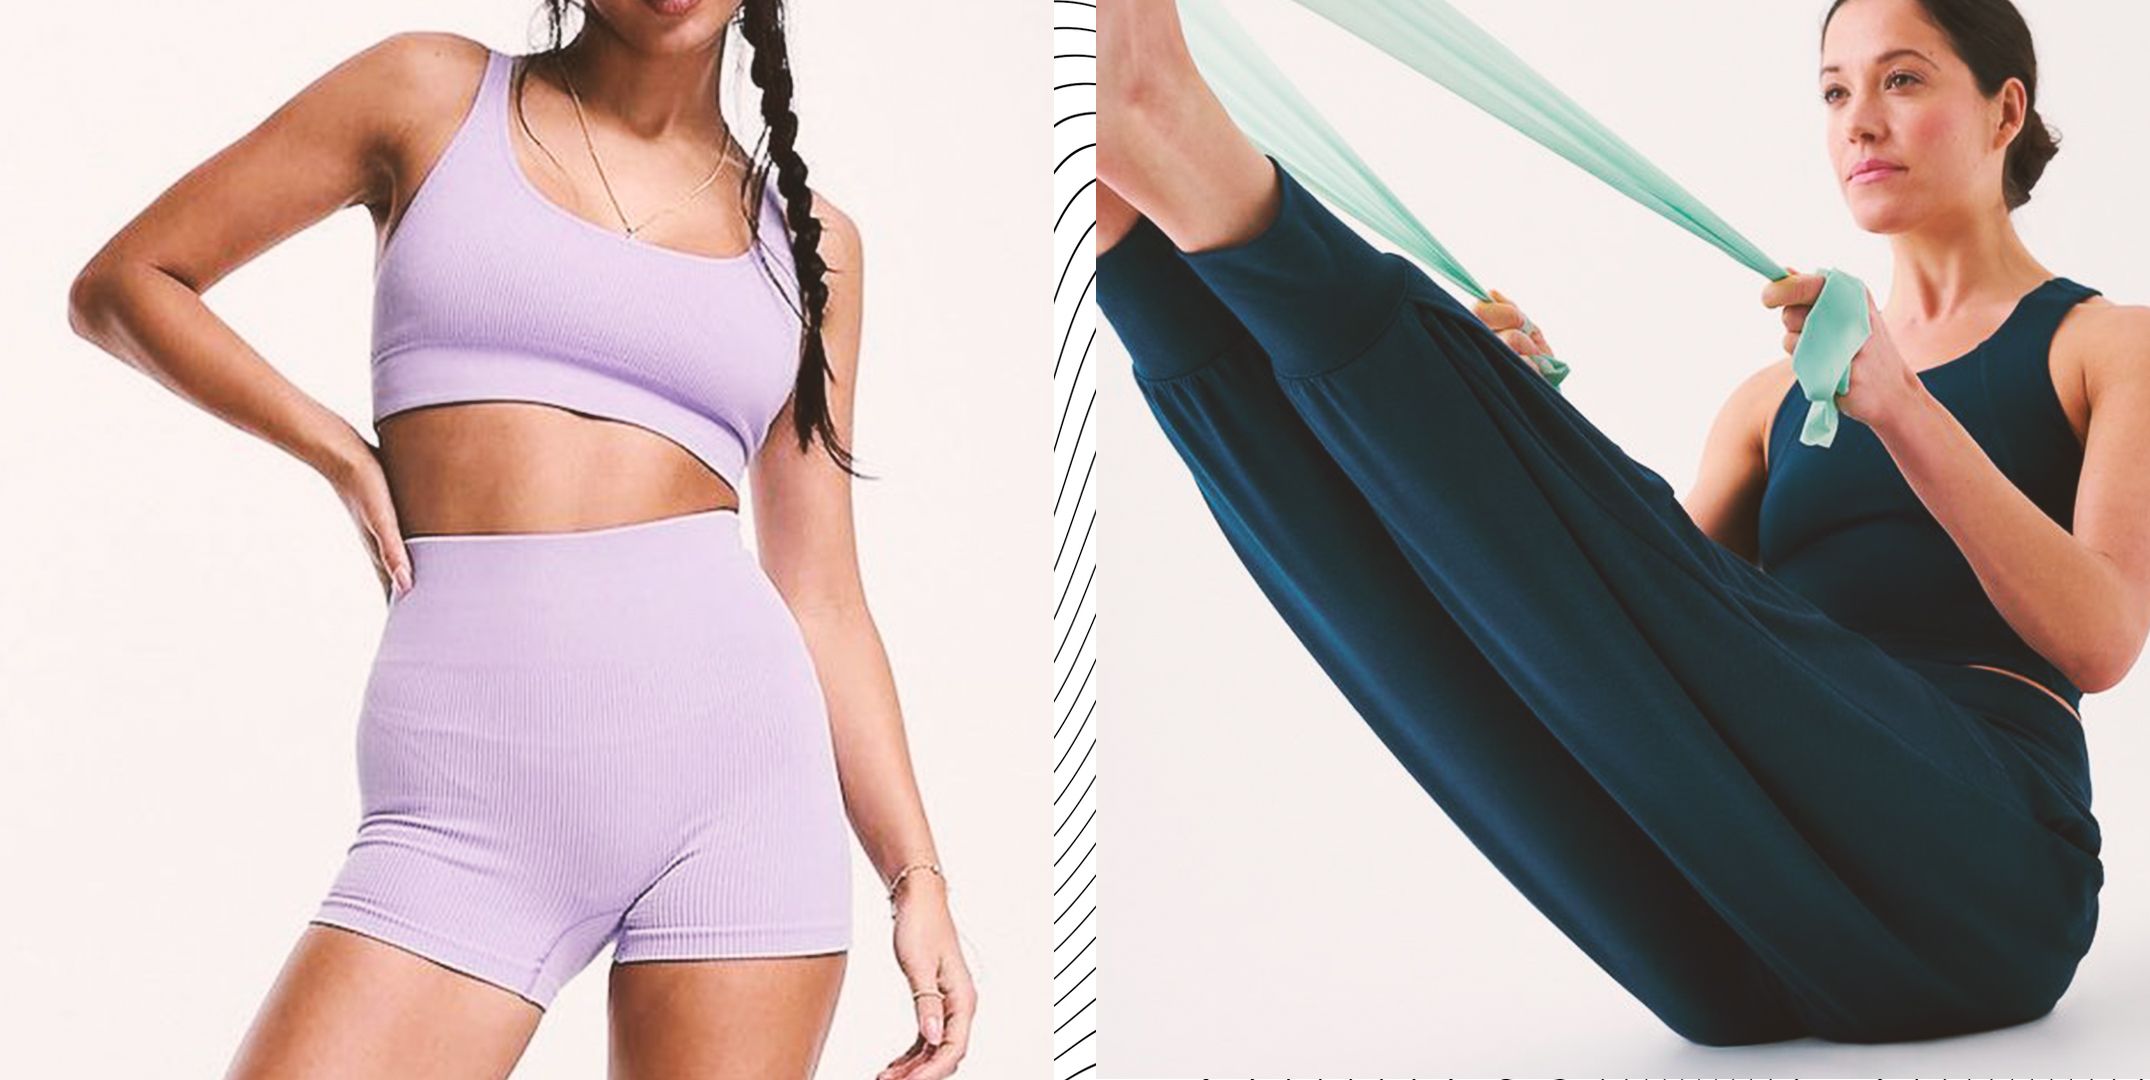 How to choose the best yoga outfit